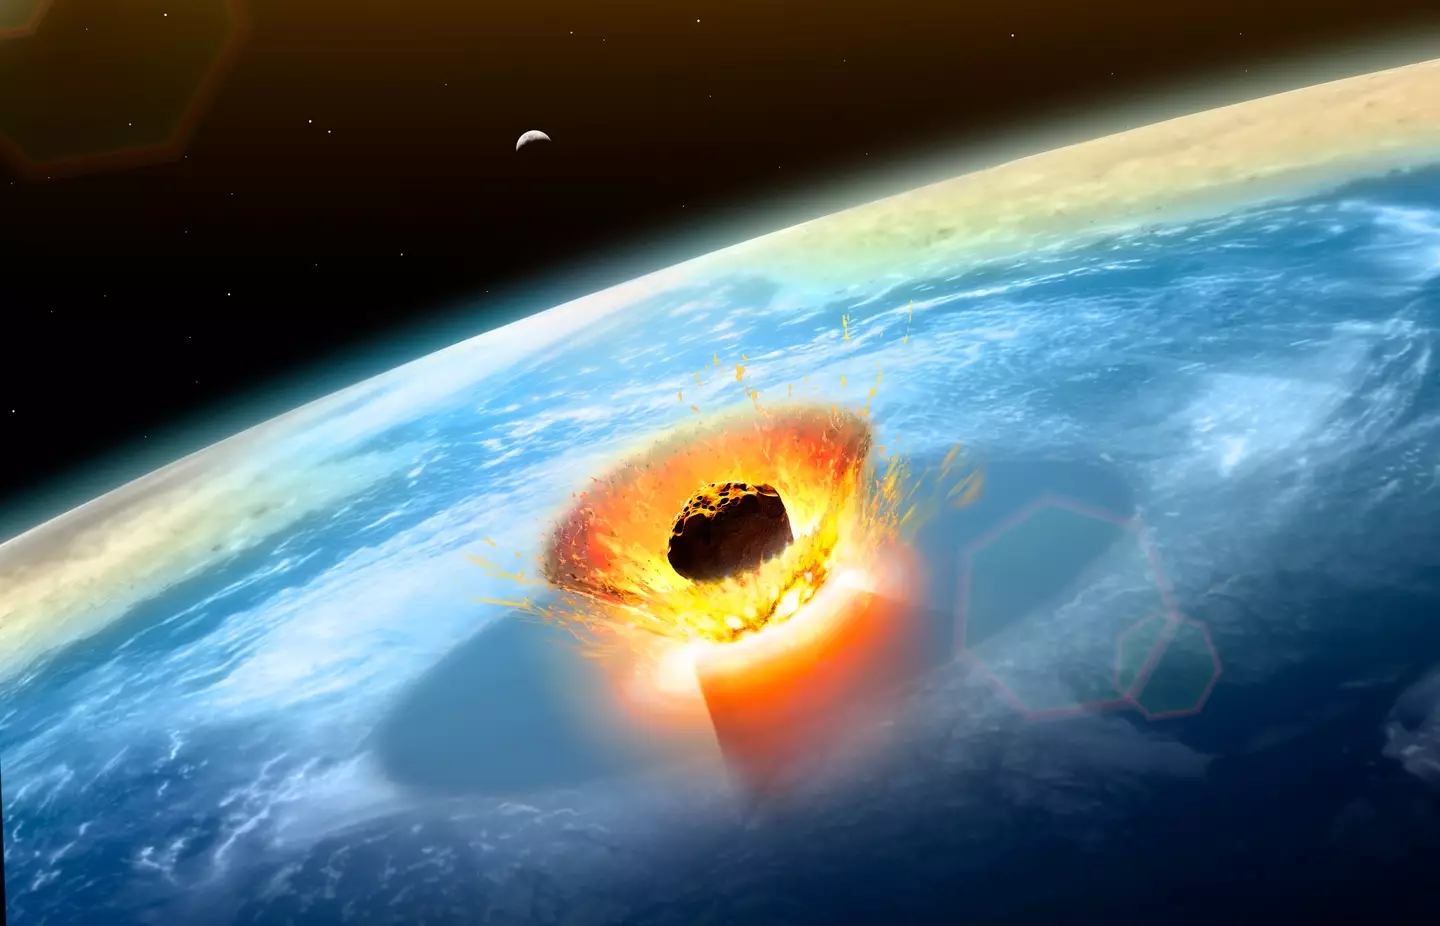 The asteroid was between 11 and 81 kilometres in diameter.